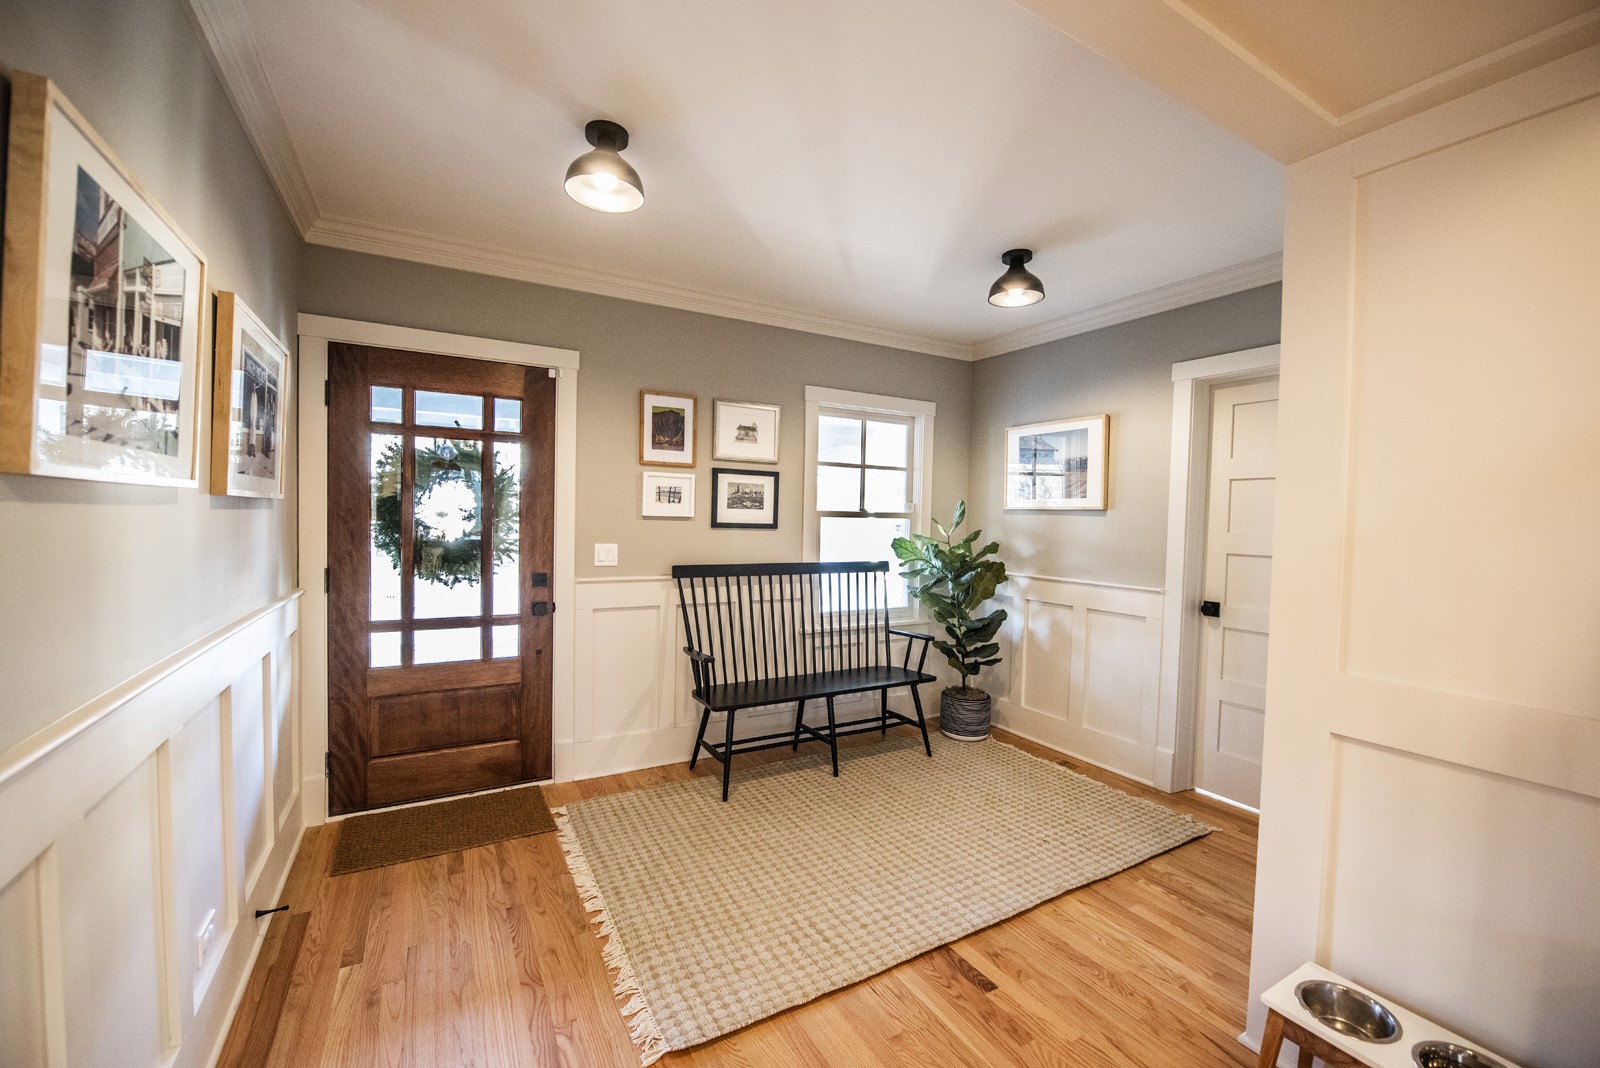 Interior of entry room with black bench, wood floors, grey walls with picture frames, pet bowls